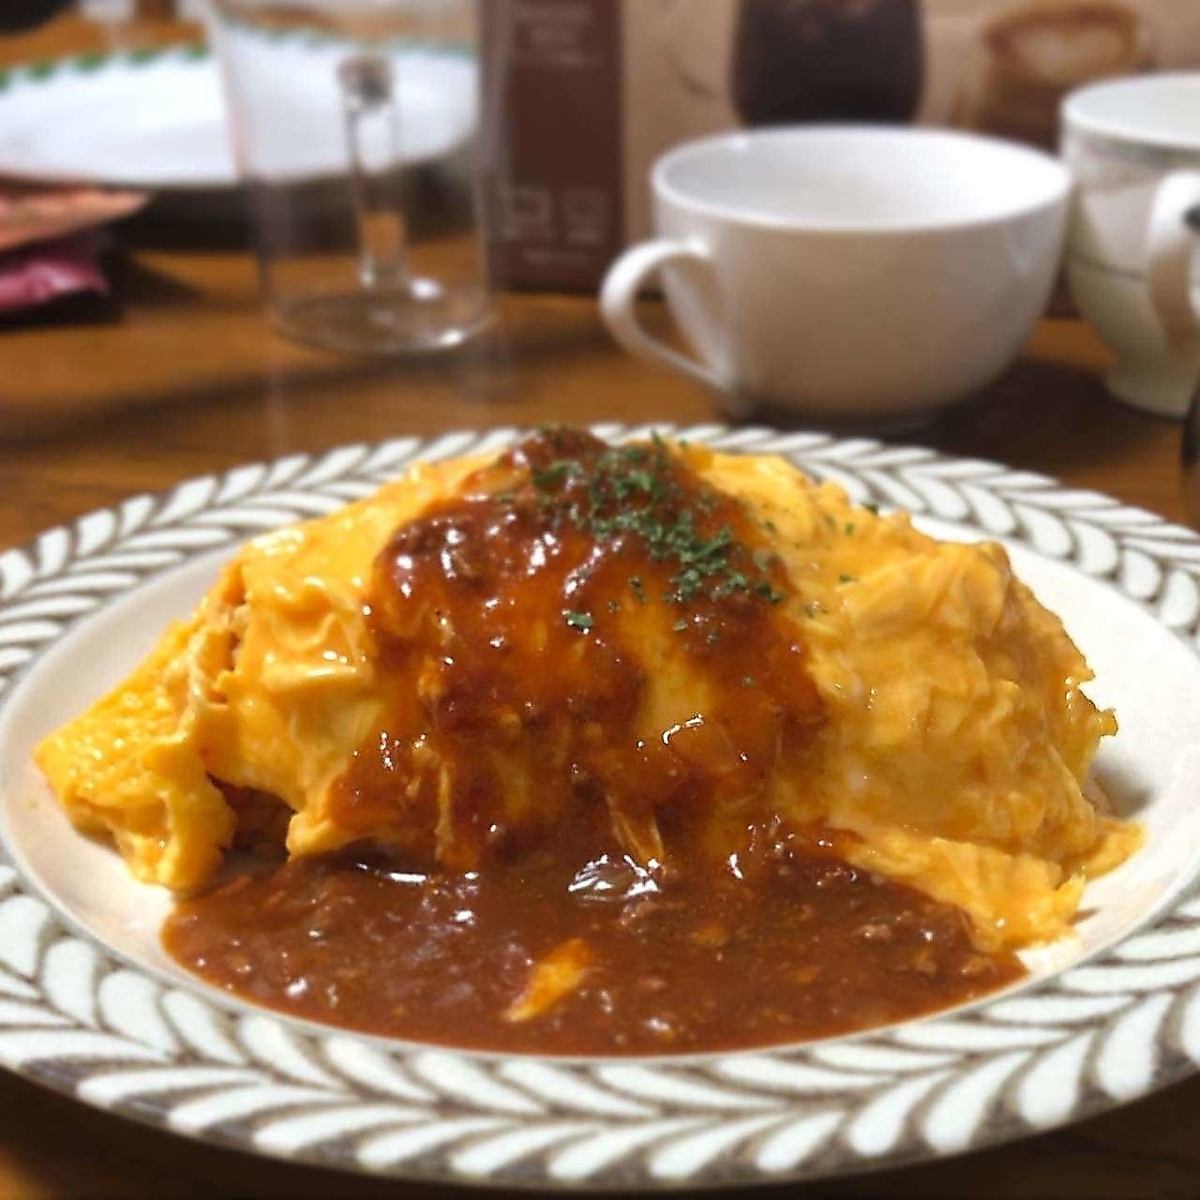 Please enjoy the rich and creamy omelet rice and specialty coffee!